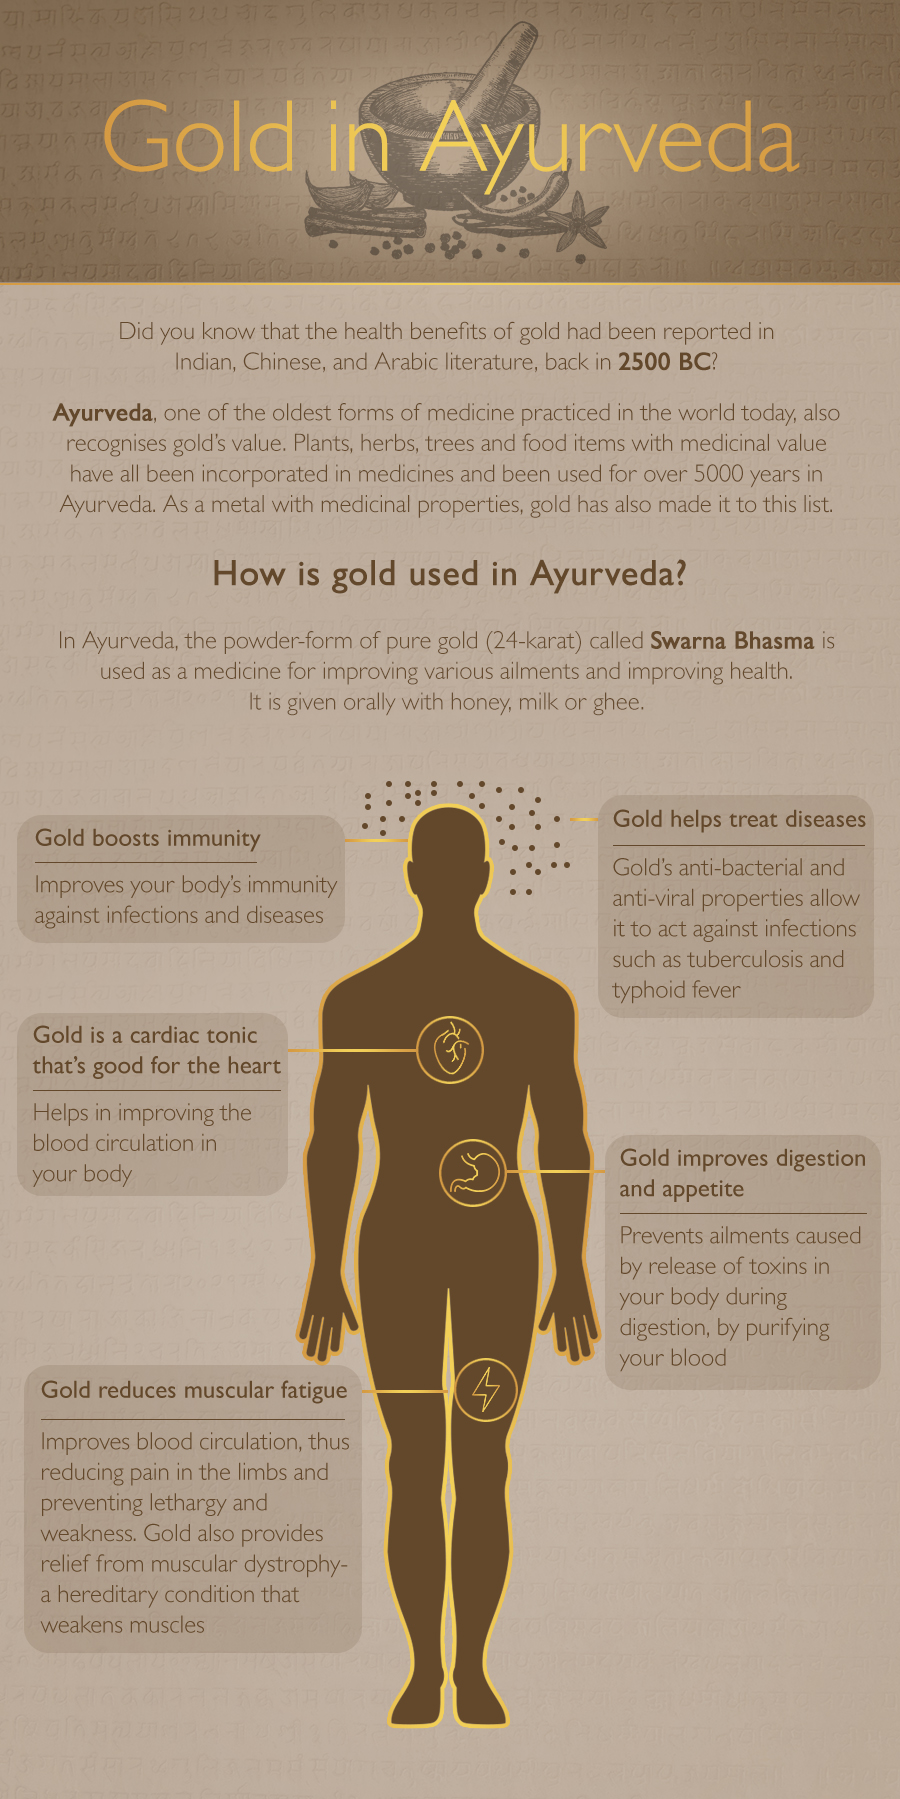 Gold has been highlighted in literature around the world for its health benefits. Know how medicinal use of gold in Ayurvedic treatment helps in improving health and curing various ailments.